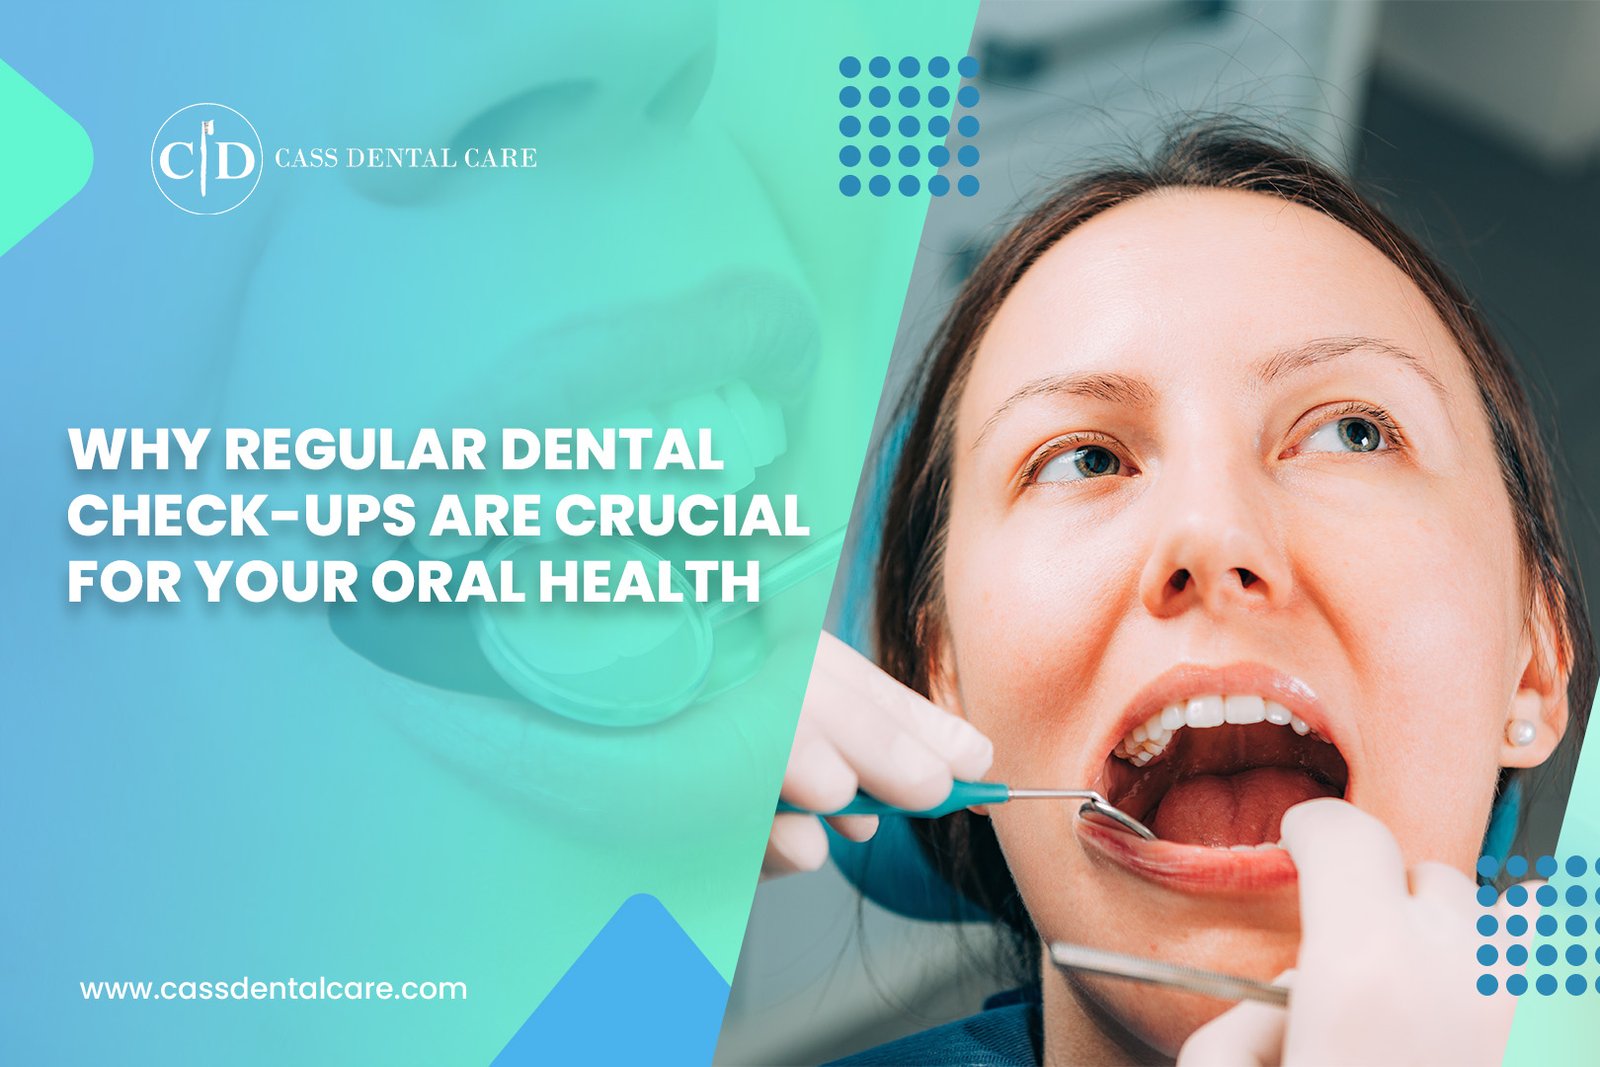 Why Regular Dental Check-ups Are Crucial for Your Oral Health